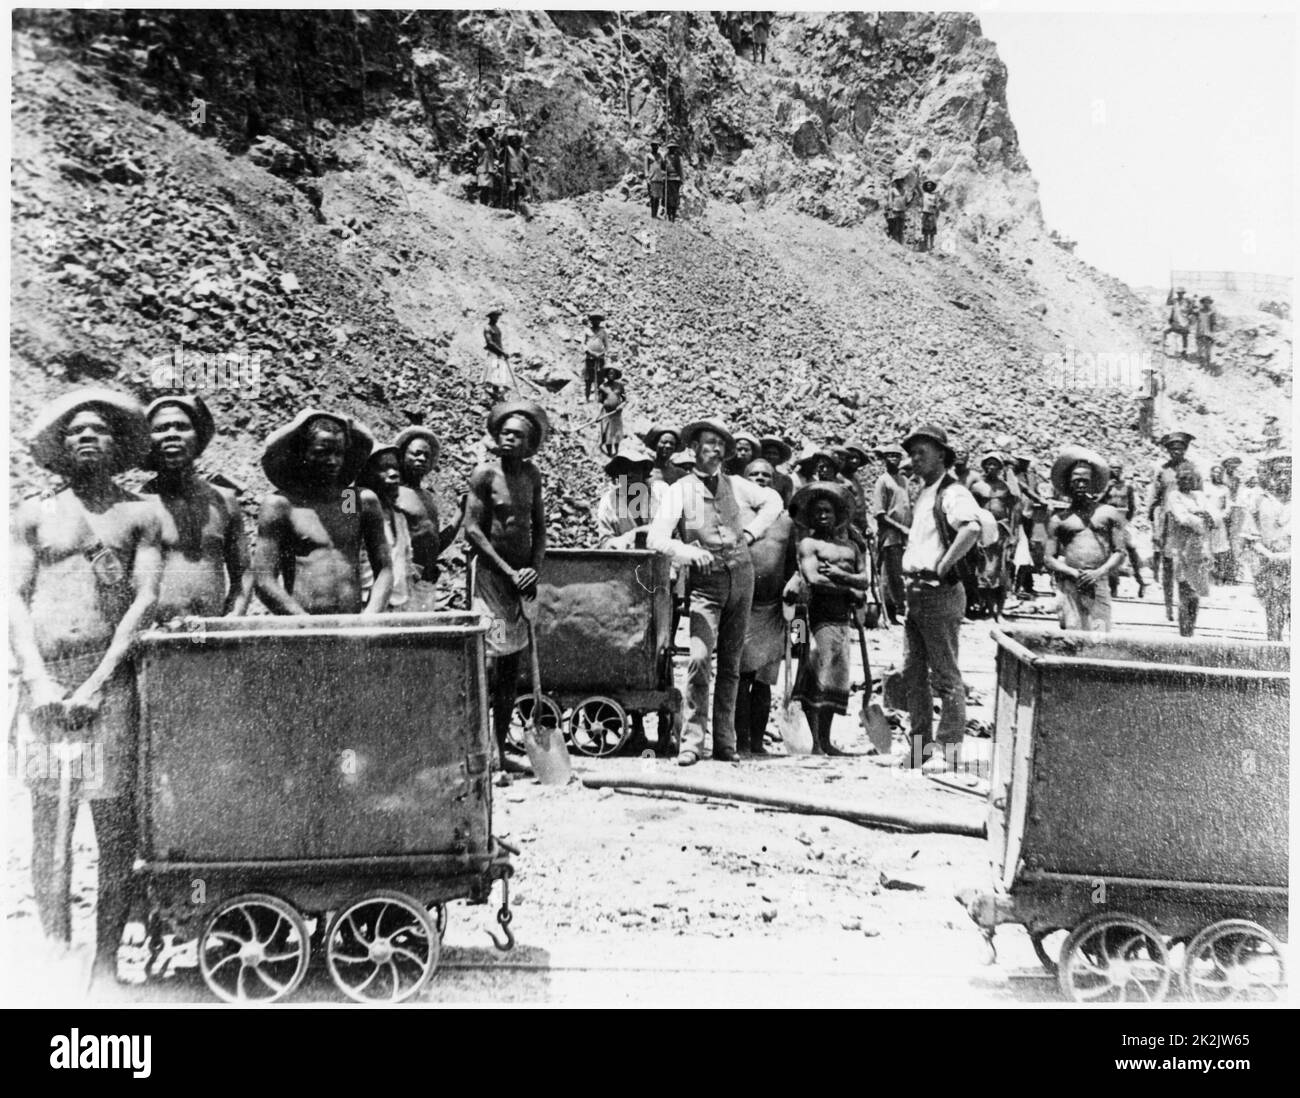 Zulu 'boys' at De Beers diamond mines. From photograph taken c.1885. In 1887 and 1888 Cecil Rhodes amalgamated the diamond mines around Kimberley, which included De Beers, into Consolidated Mines Stock Photo